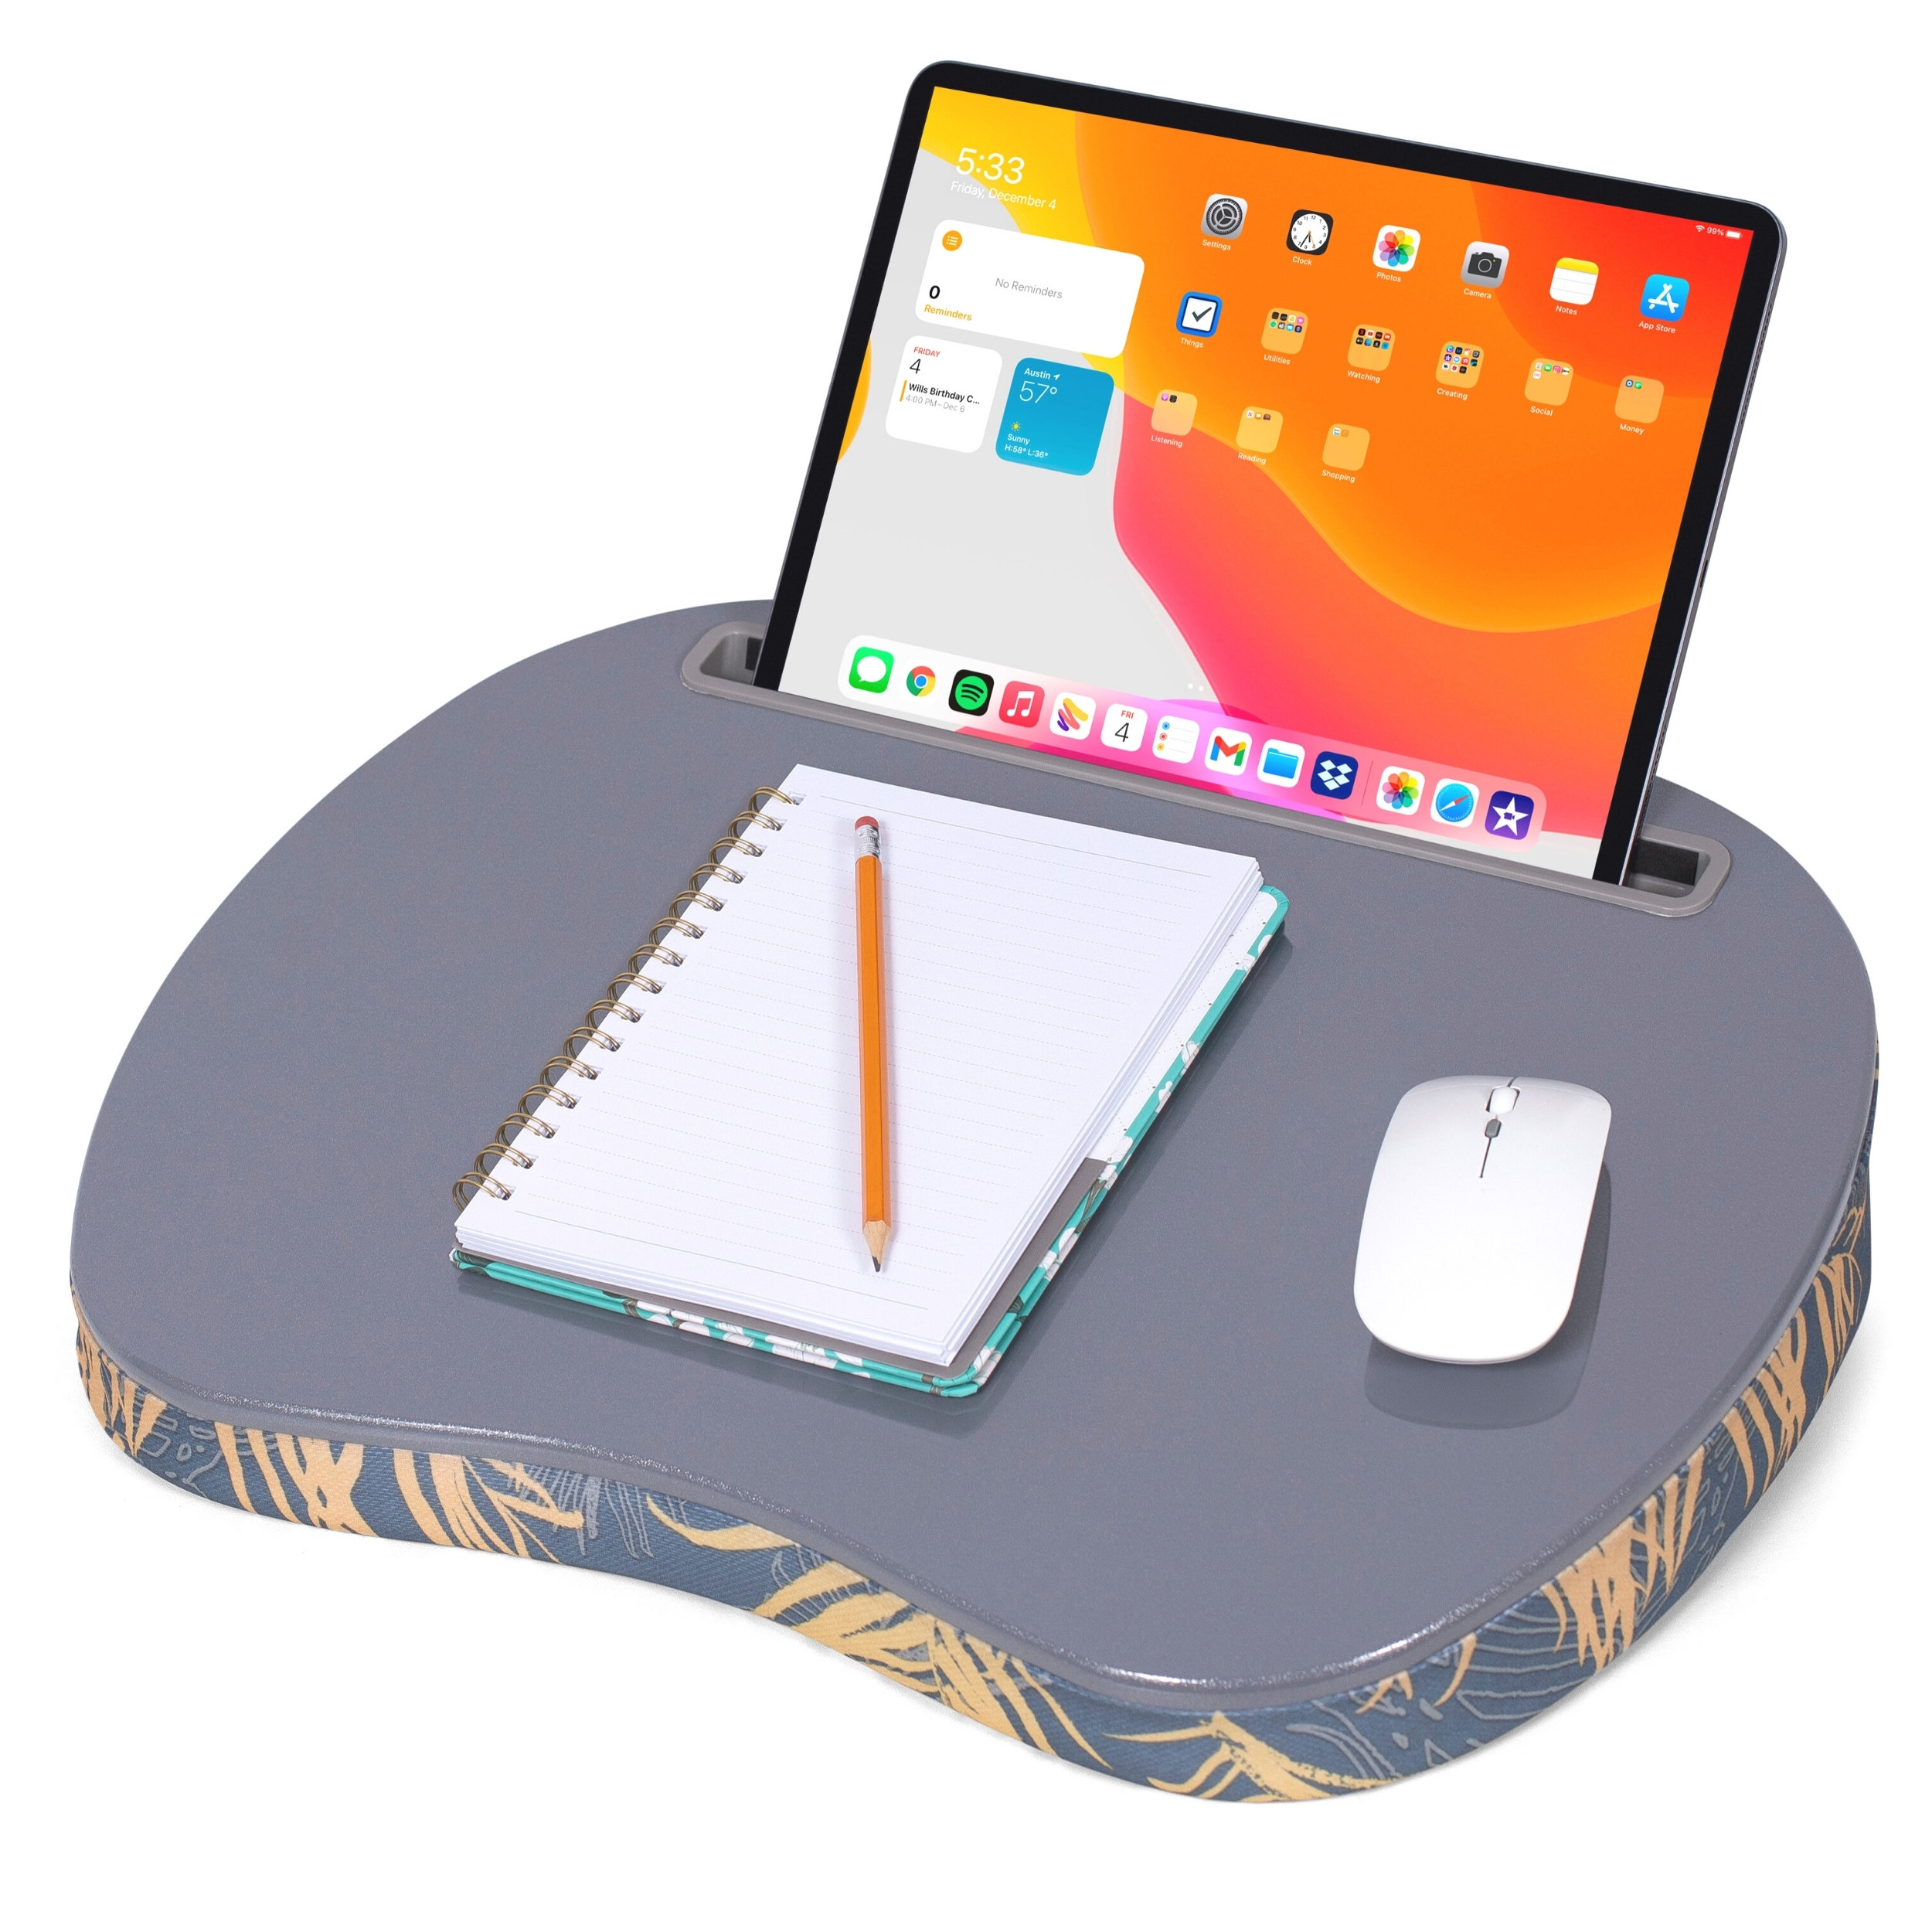 Traybo 2.0 Lap Desk, Bamboo Top Lap Desk With Pillow For Laptop Built In  Slot For Tablet Or Phone, Lap Pad For Working, Reading, Writing, Lap Board,  Blue 